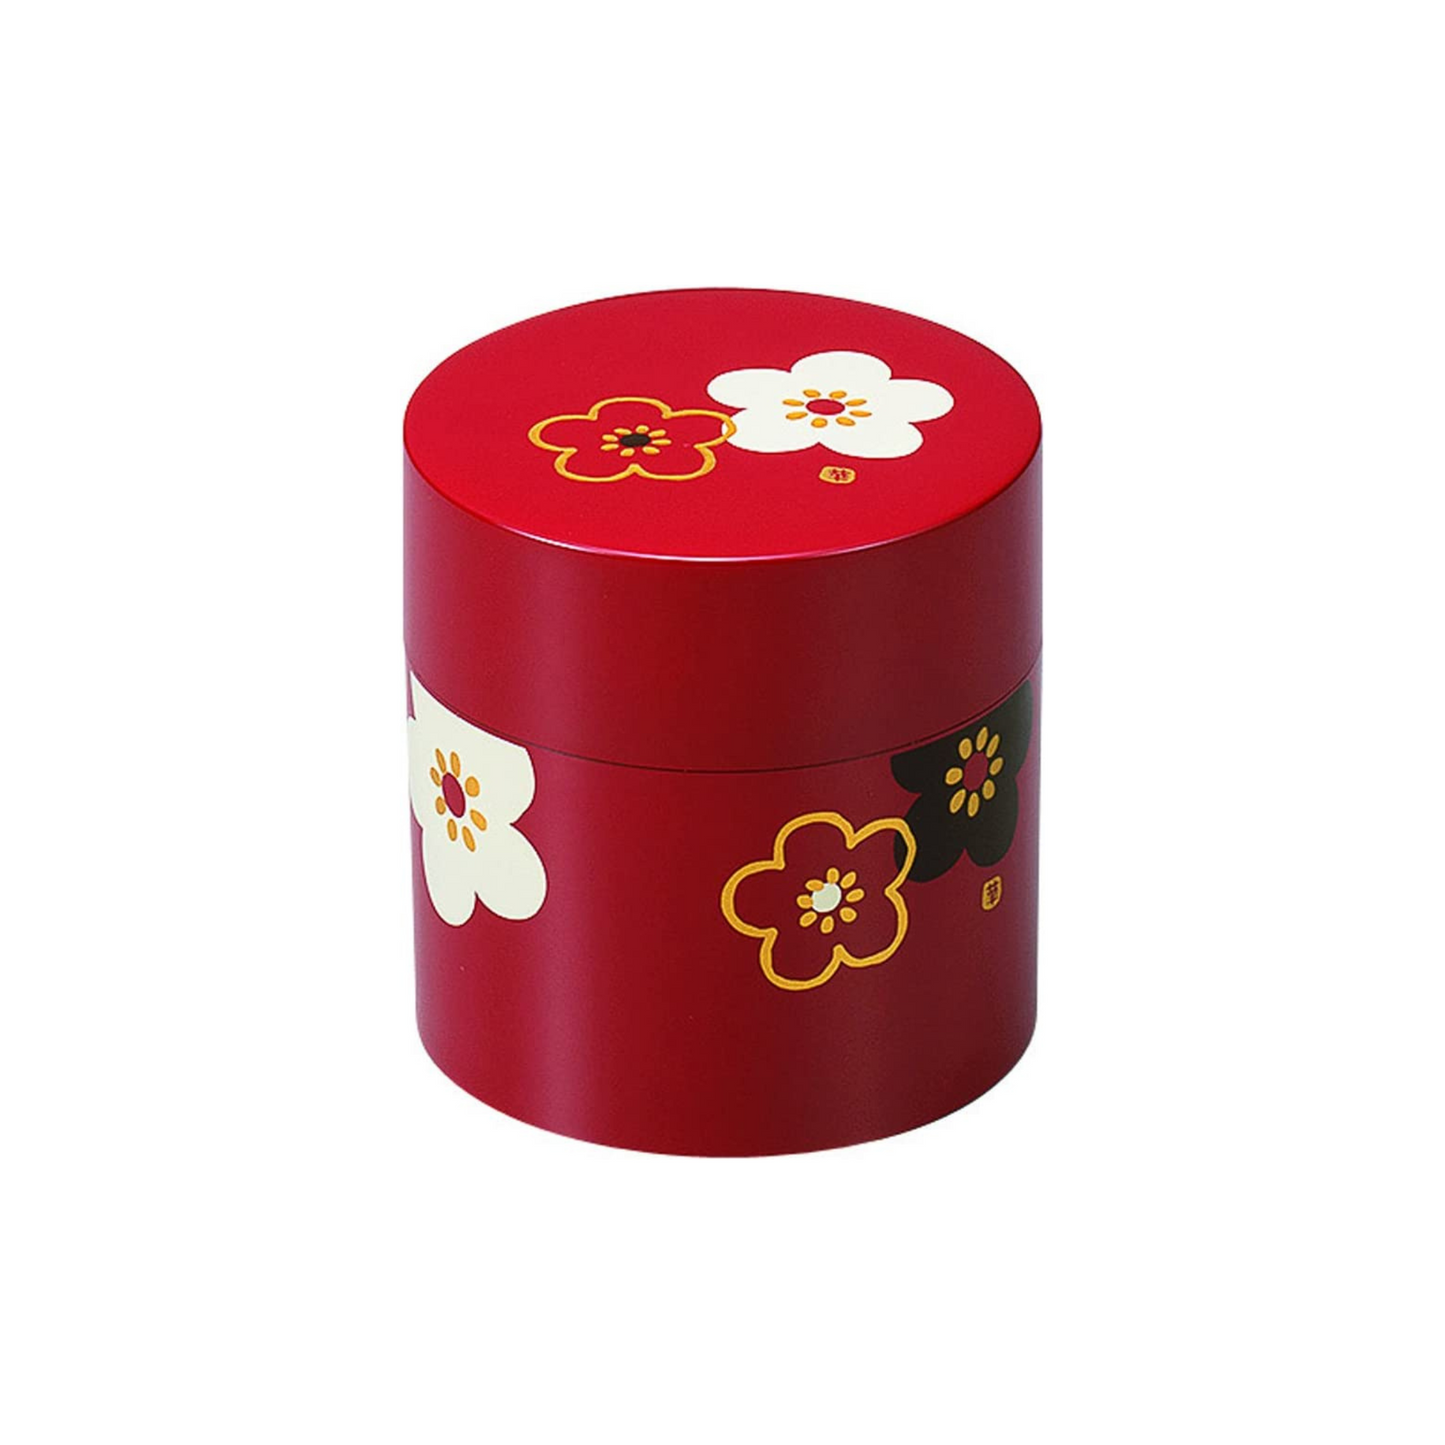 Hanamoyo Red Tea Canister | Small (350mL)